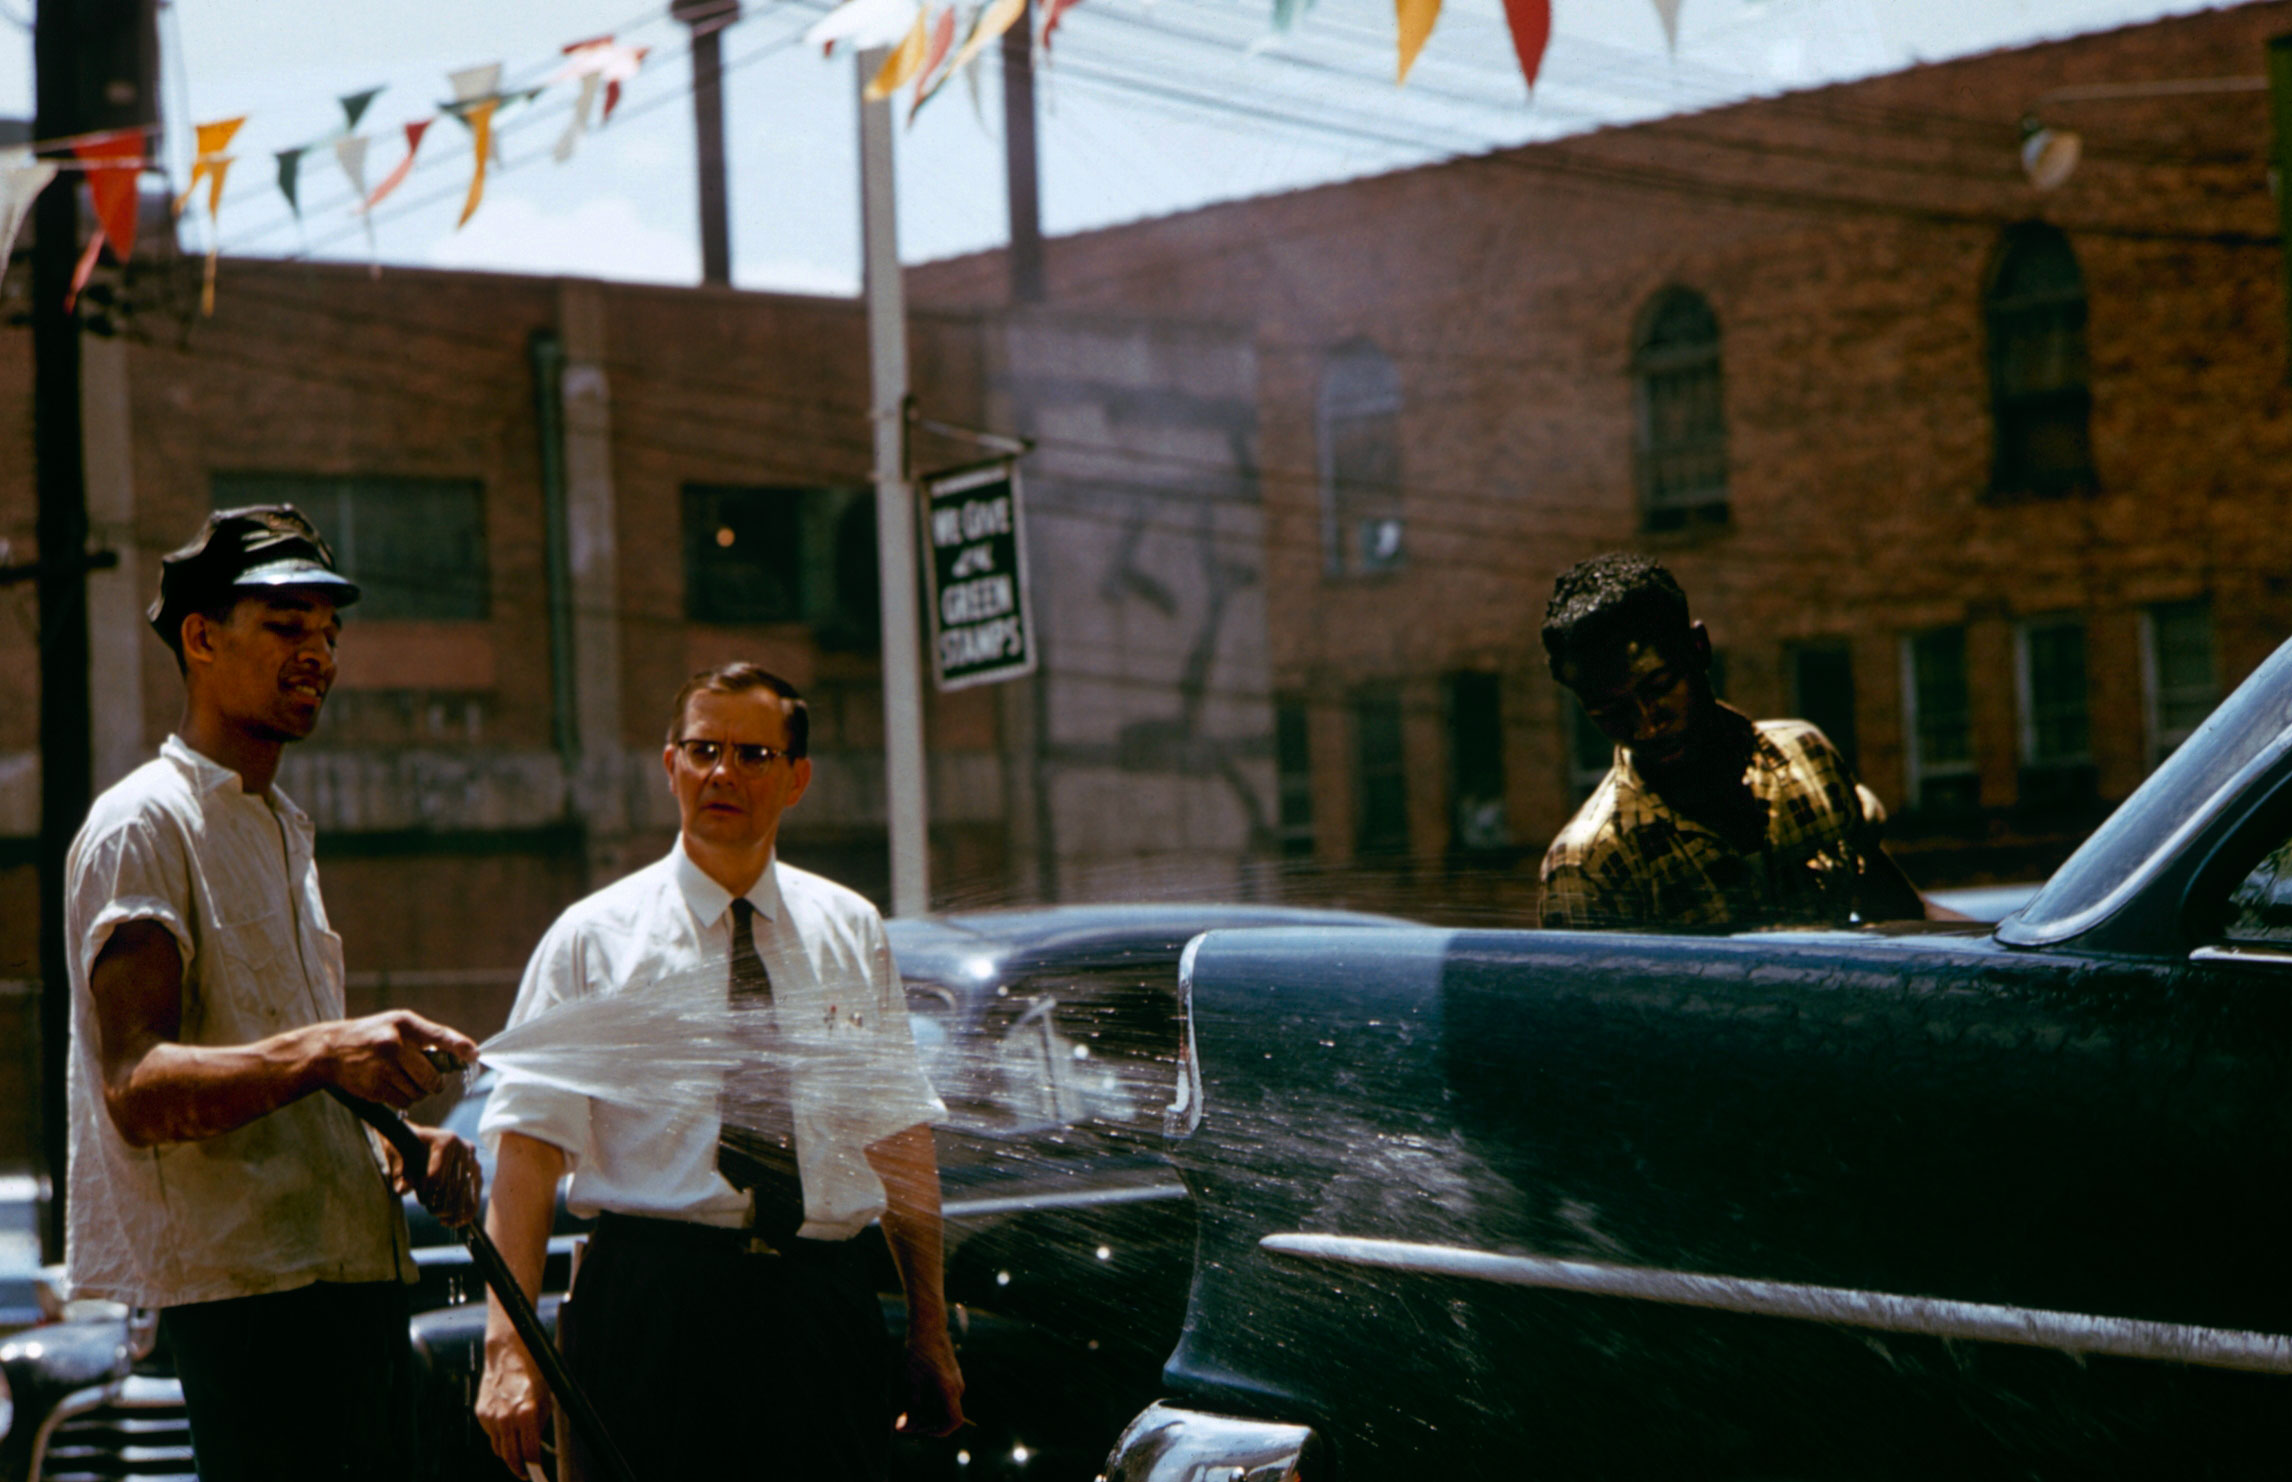 Greenville, South Carolina's mayor Kenneth Cass (above, in tie) at a car wash, 1956.